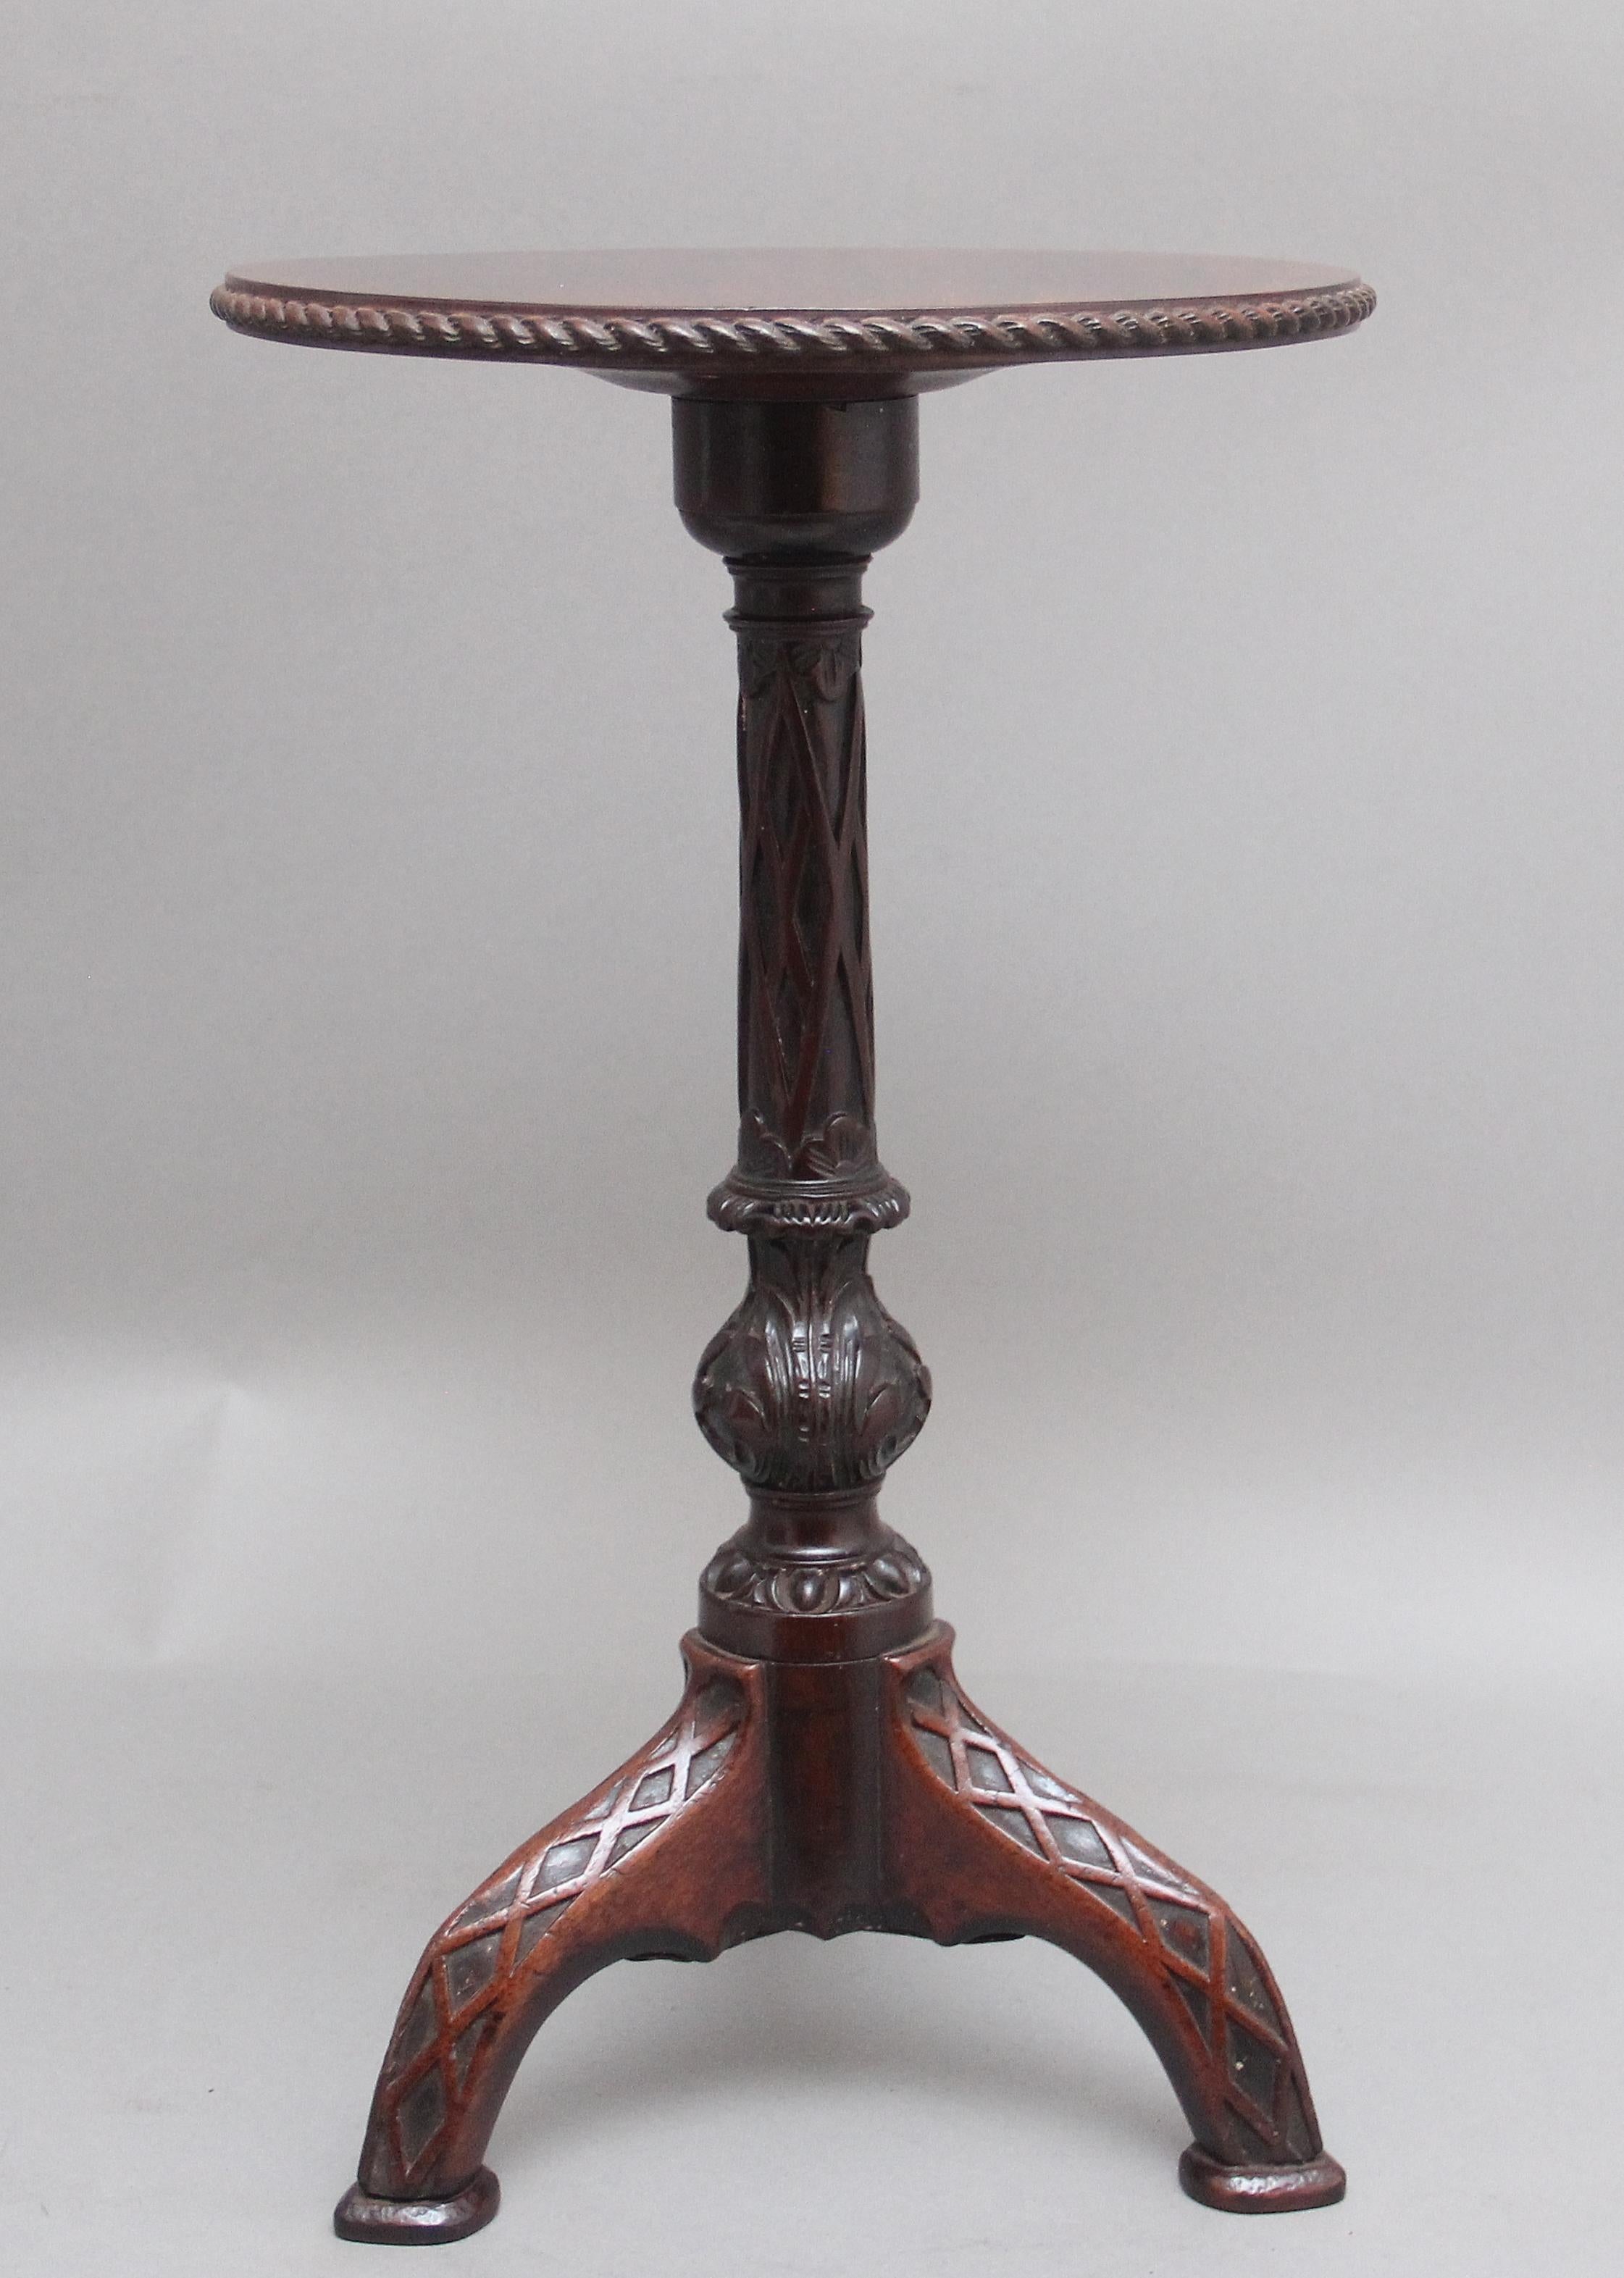 A highly decorative early 19th Century carved mahogany tripod table, having a nice figured circular top with a gadrooned edge supported on an elegant carved column terminating on three carved shaped legs.  Circa 1830.